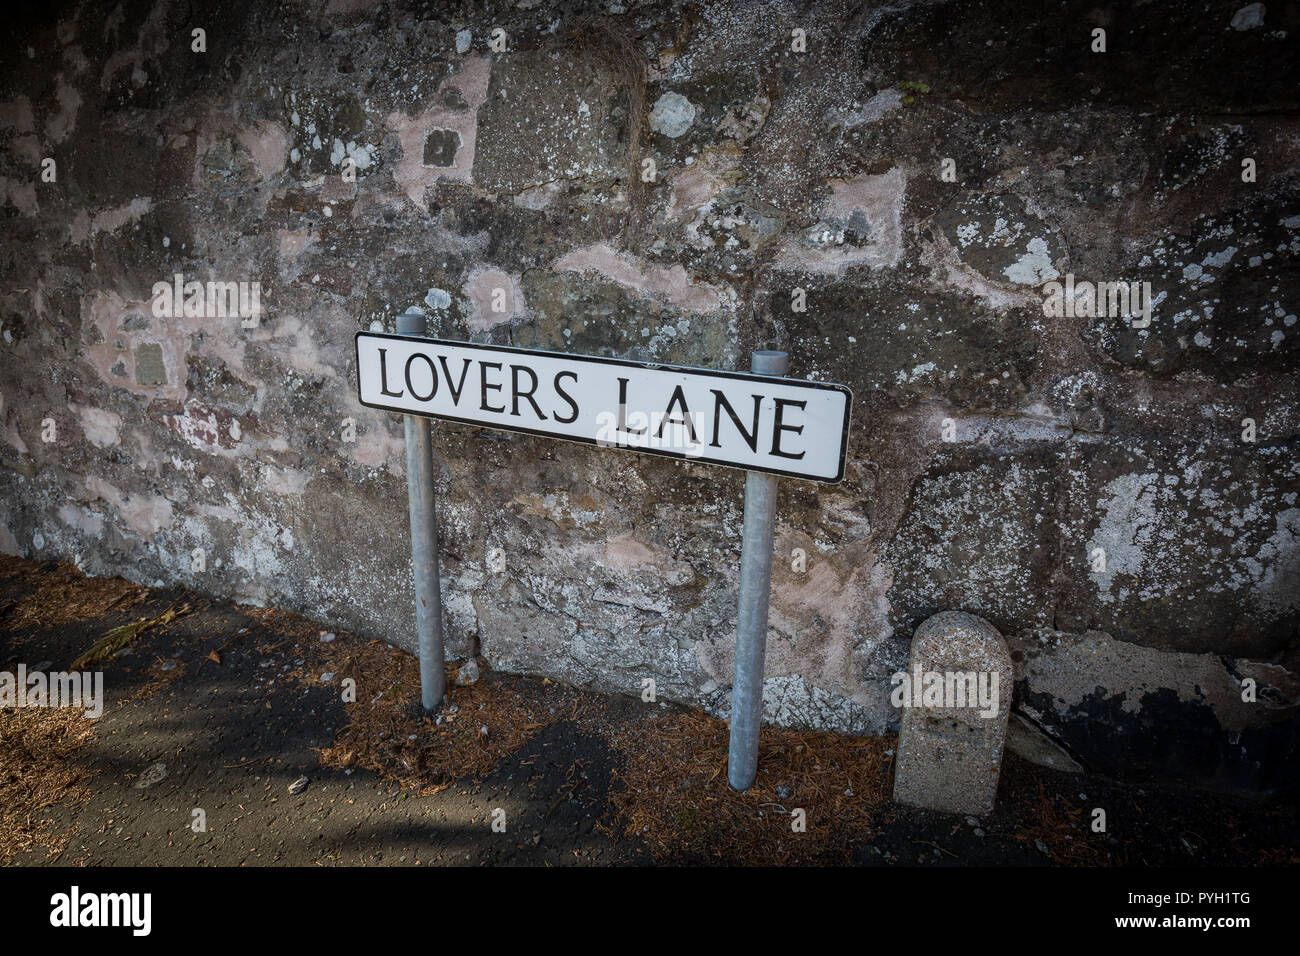 A street sign for Lovers Lane in the village of Scone, Perth and Kinross, Scotland, uk Stock Photo